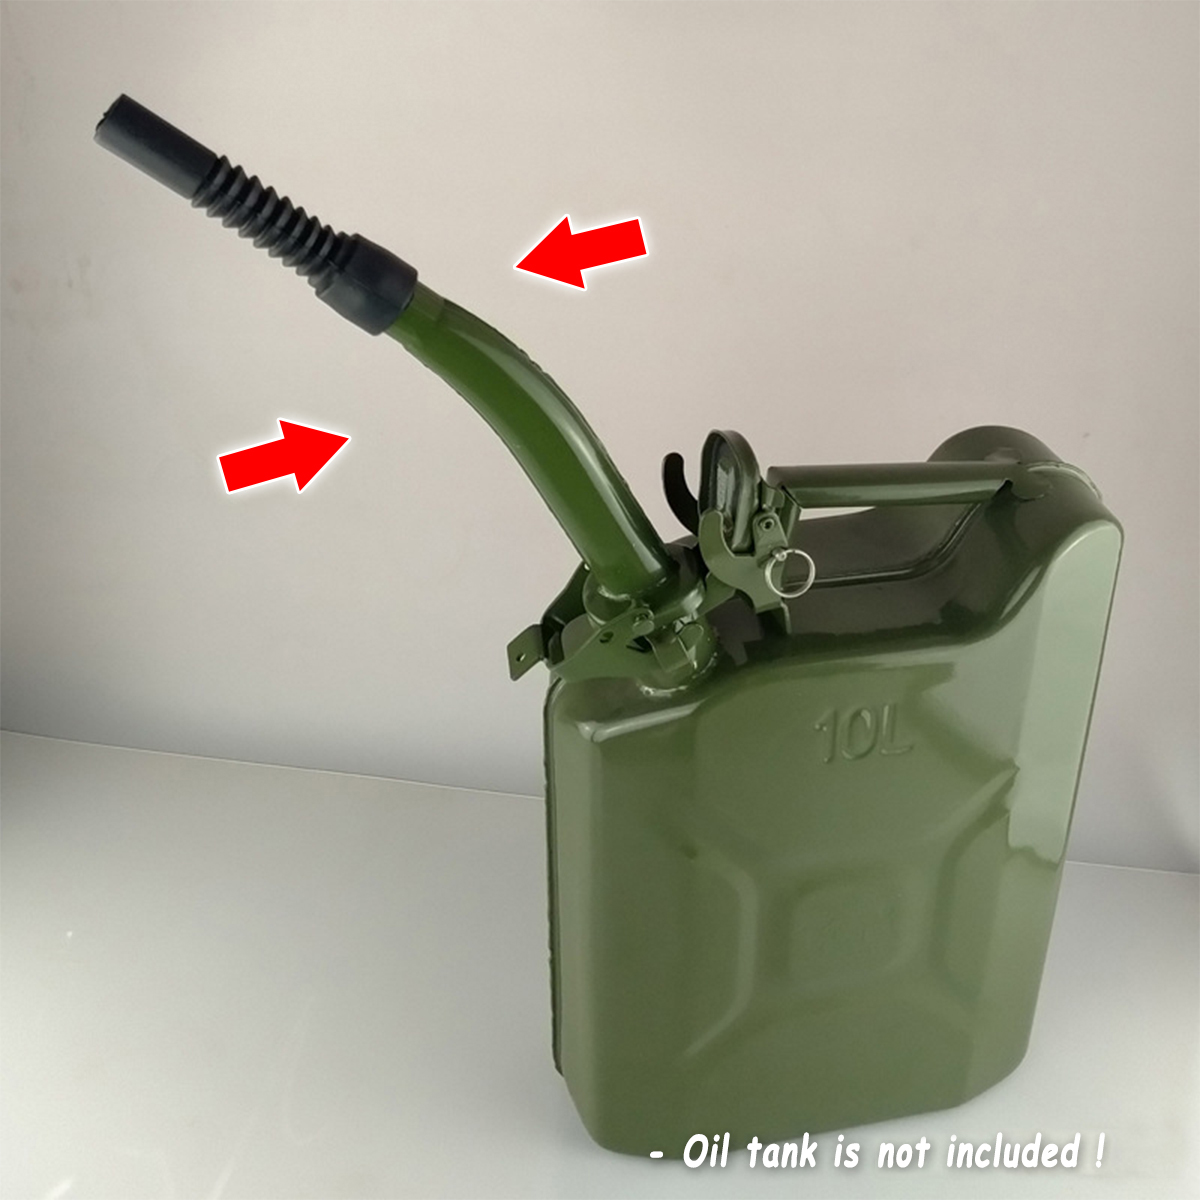 Black-Metal-Jerry-Can-Gas-Canister-Rubber-Nozzle-Spout-Military-Style-Clamp-20L-1600813-10